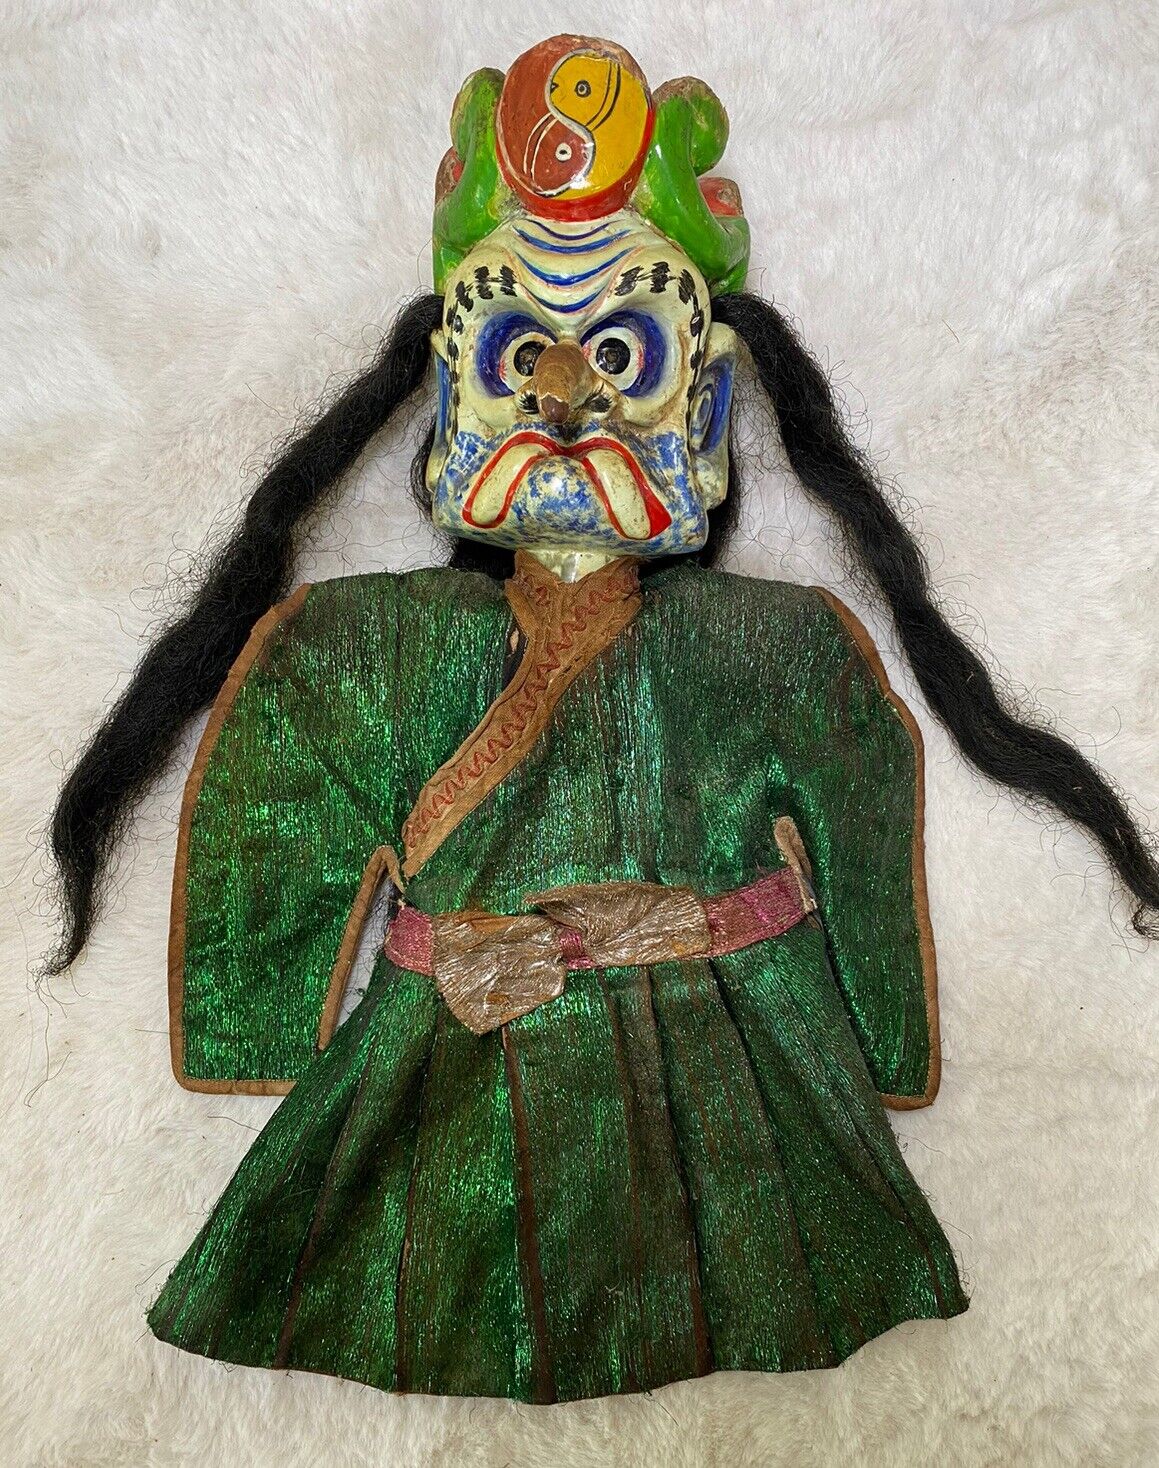 ANTIQUE OPERA PUPPET Chinese Theater Doll Wood Carved Hair Long Nose